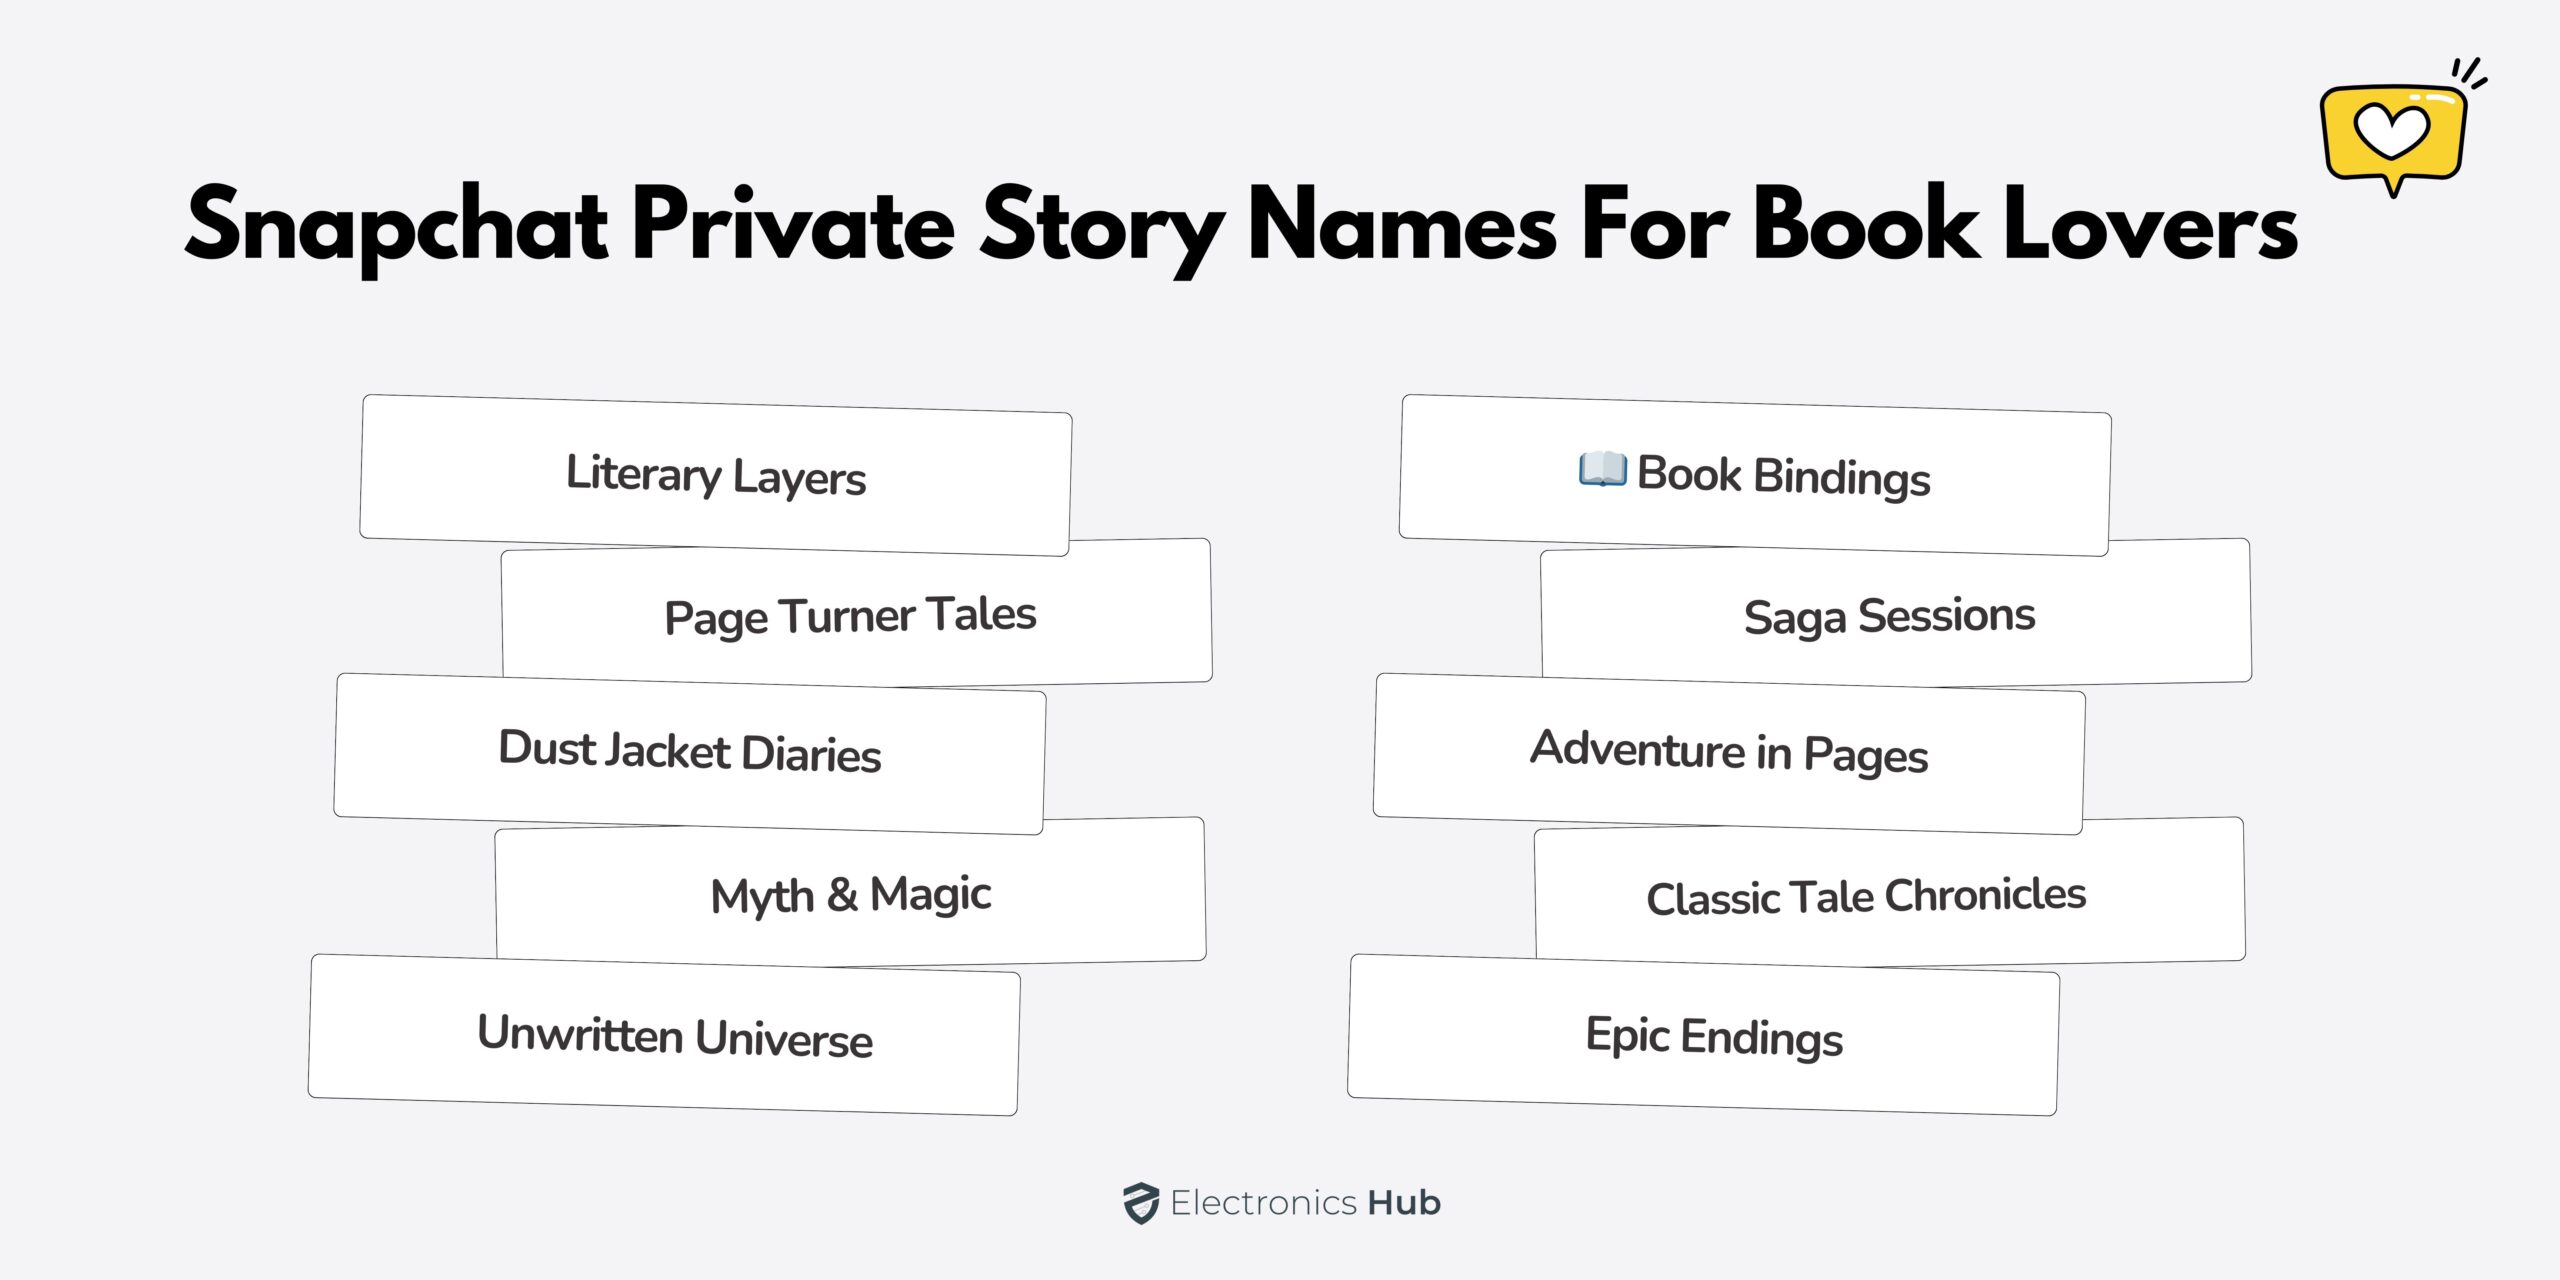 Snapchat Private Story Names for Book Lovers